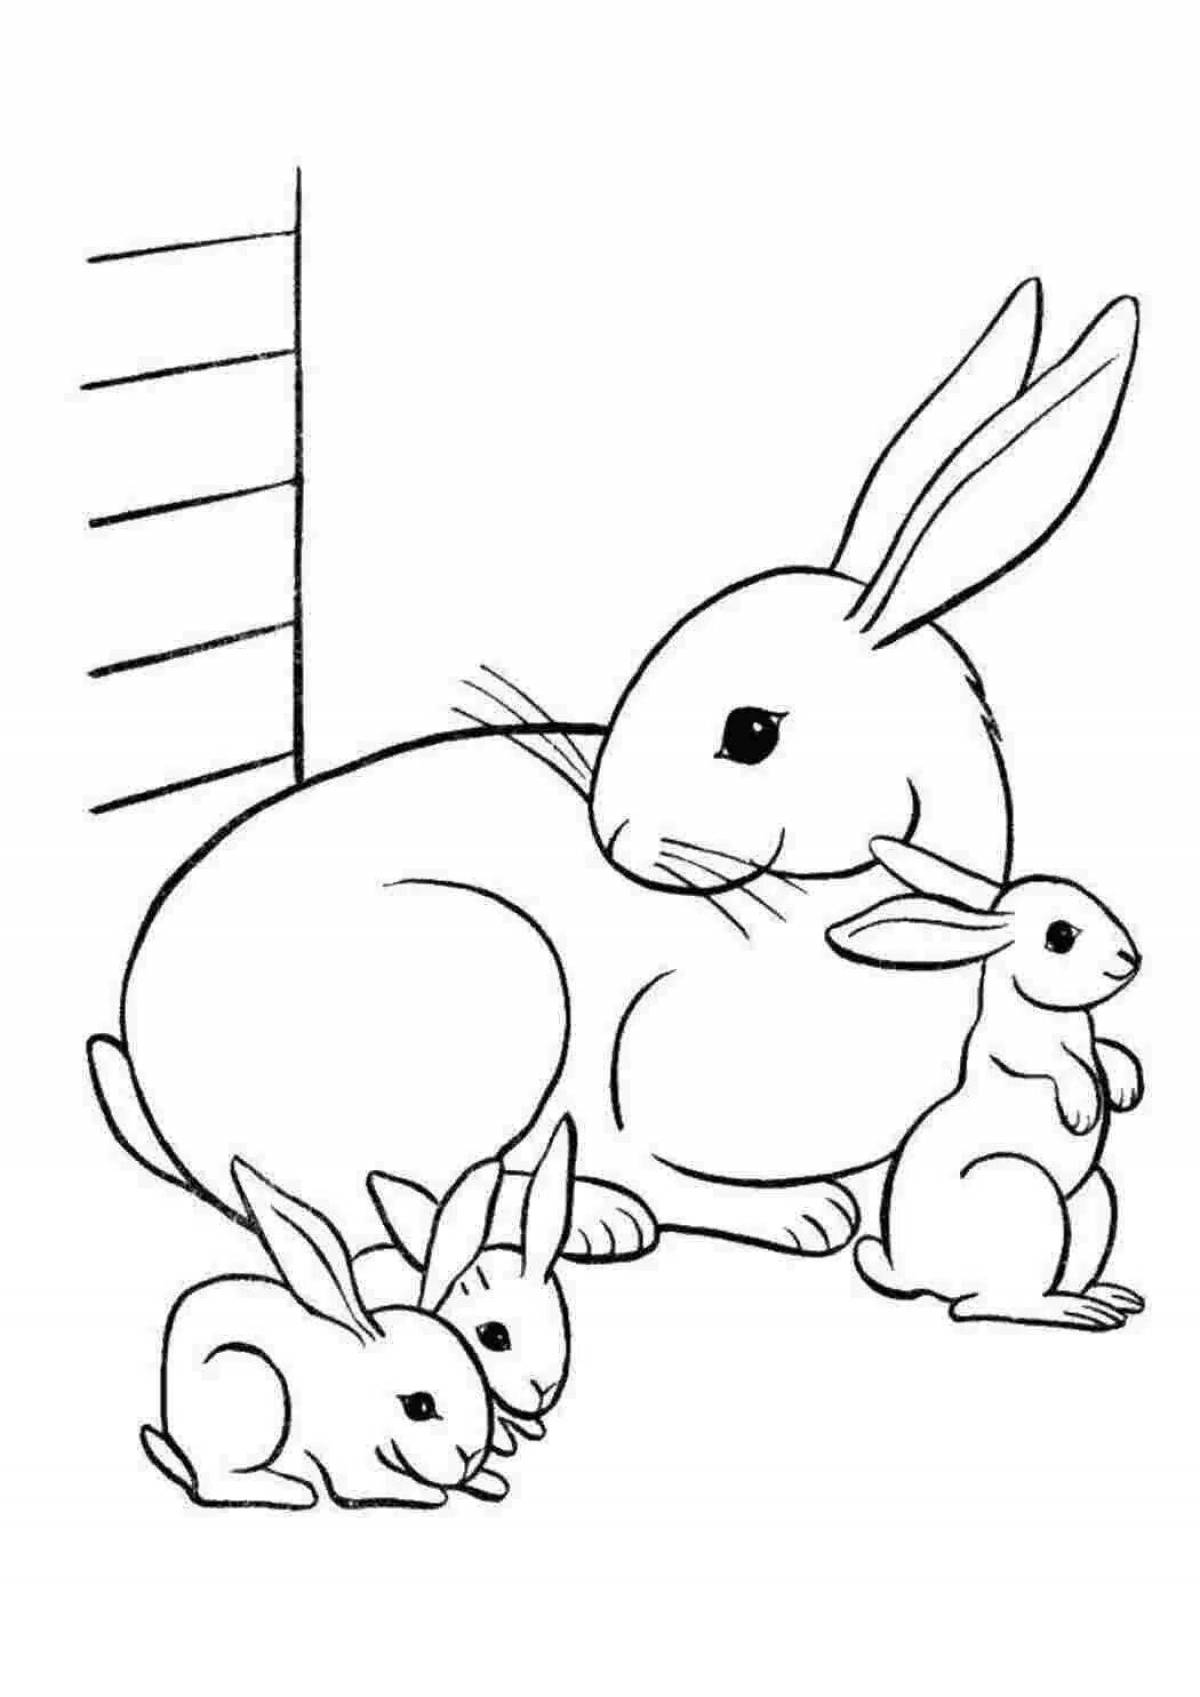 Colorful coloring pages rabbits for girls